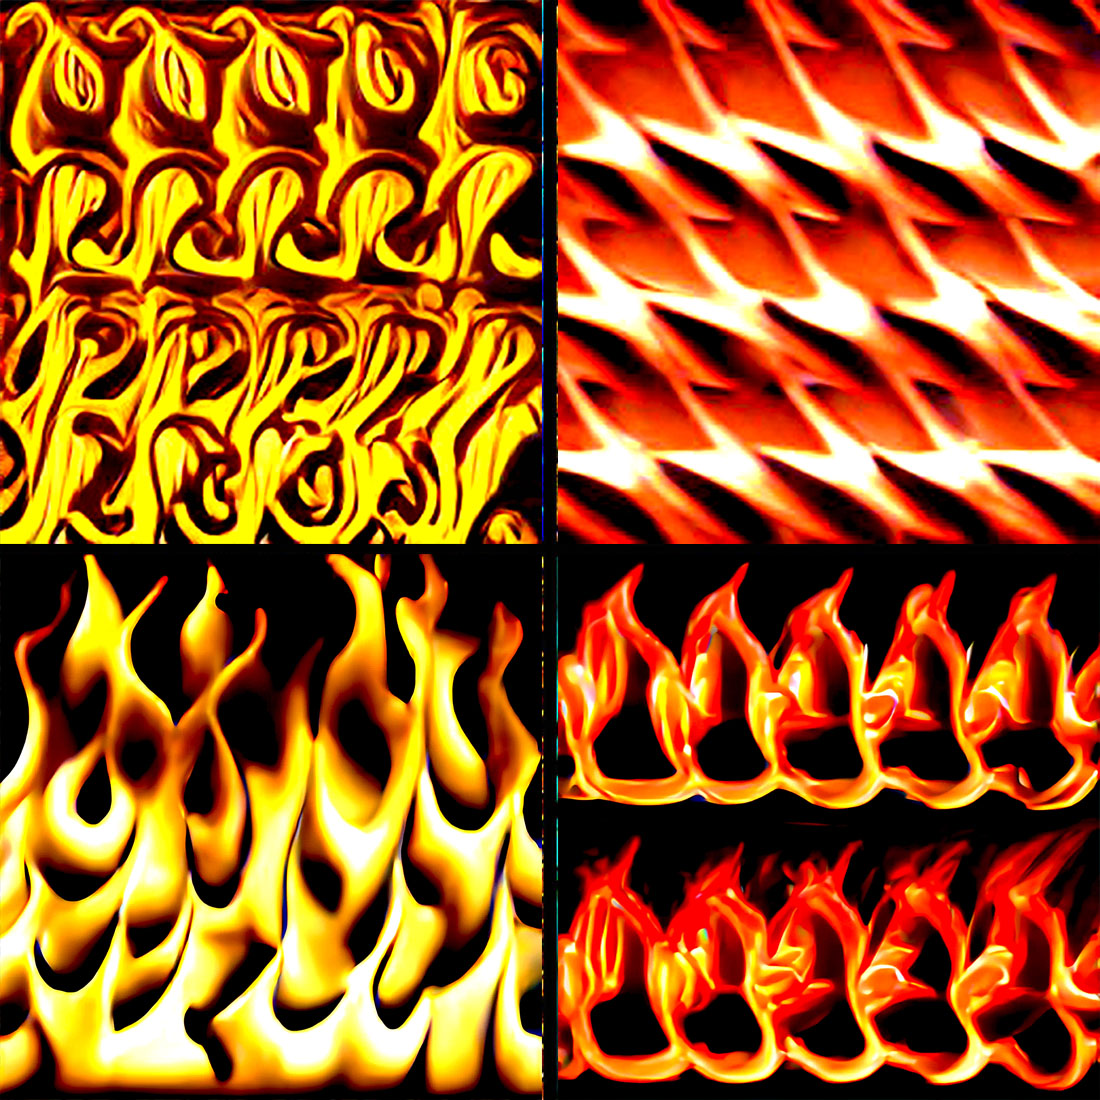 Beautiful Fire Patterns Design cover image.